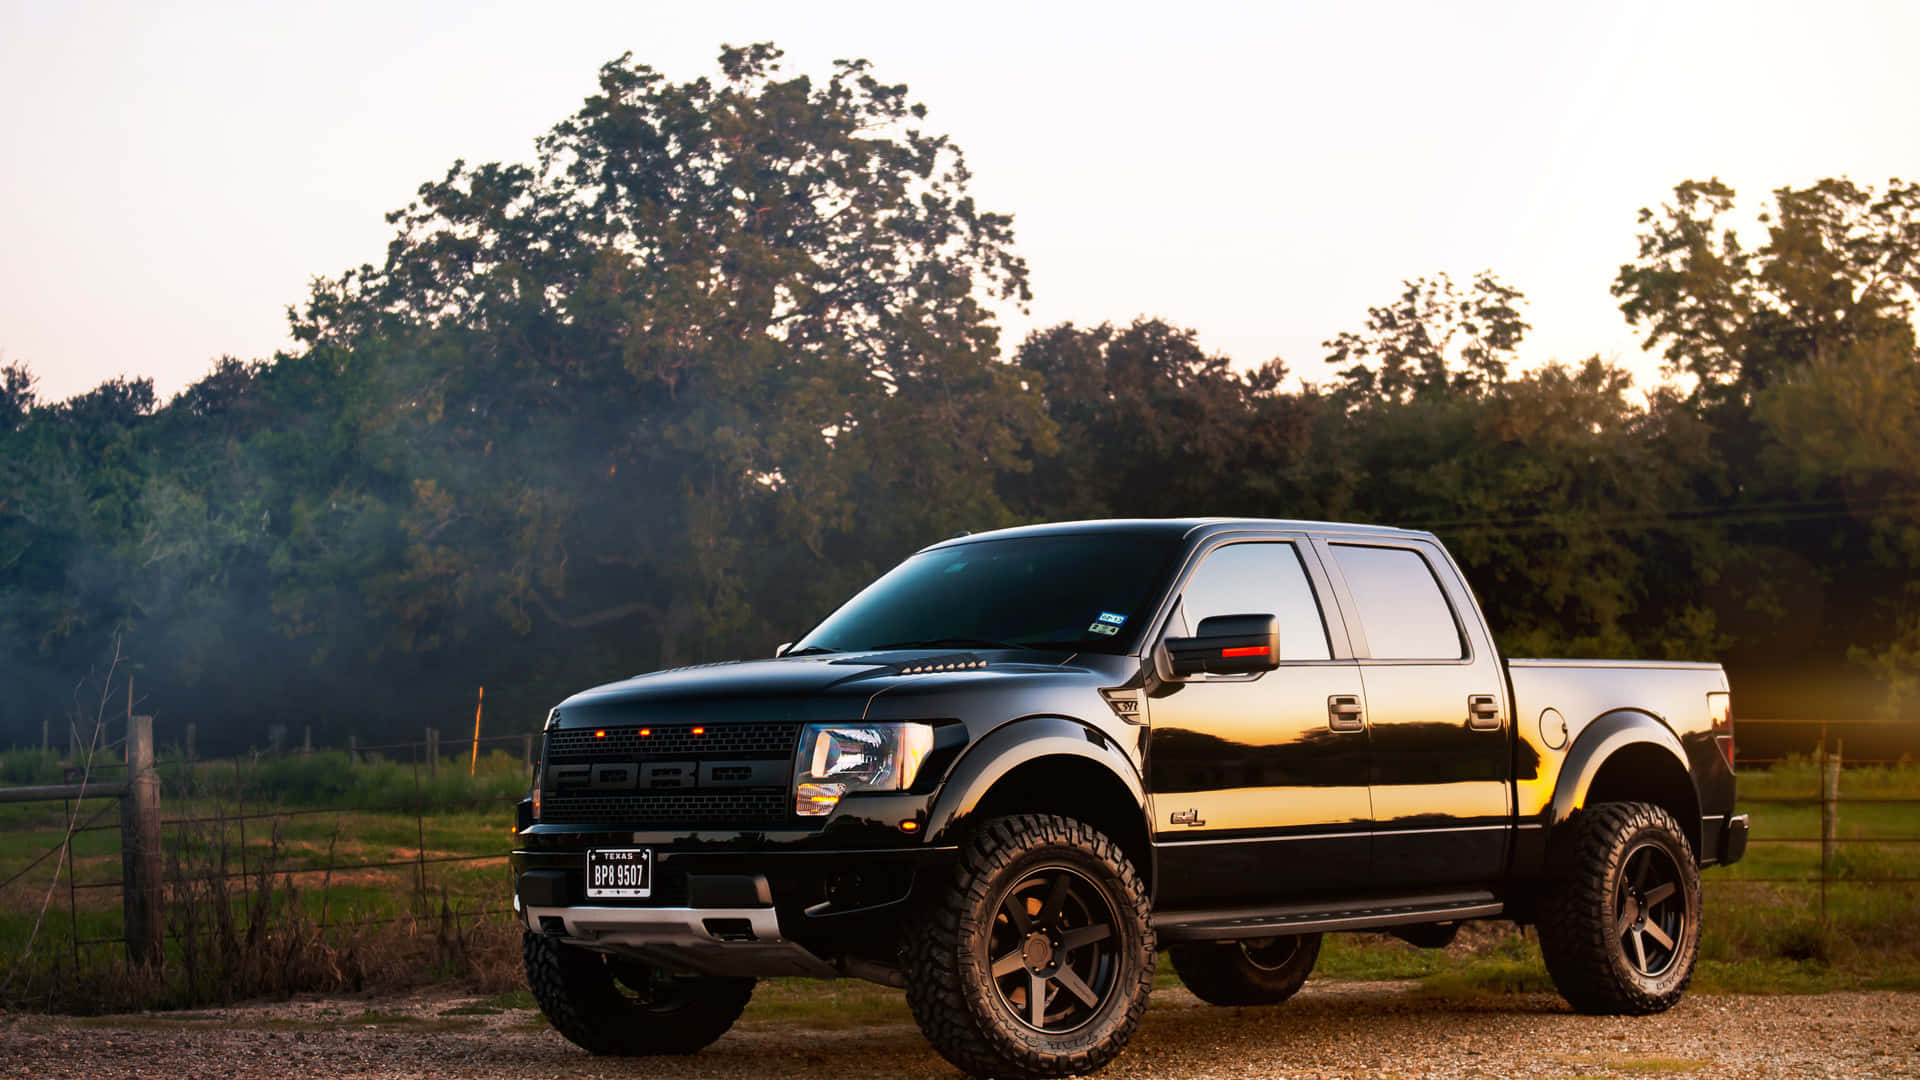 Explore The Great Outdoors In The All-new Ford Truck Background